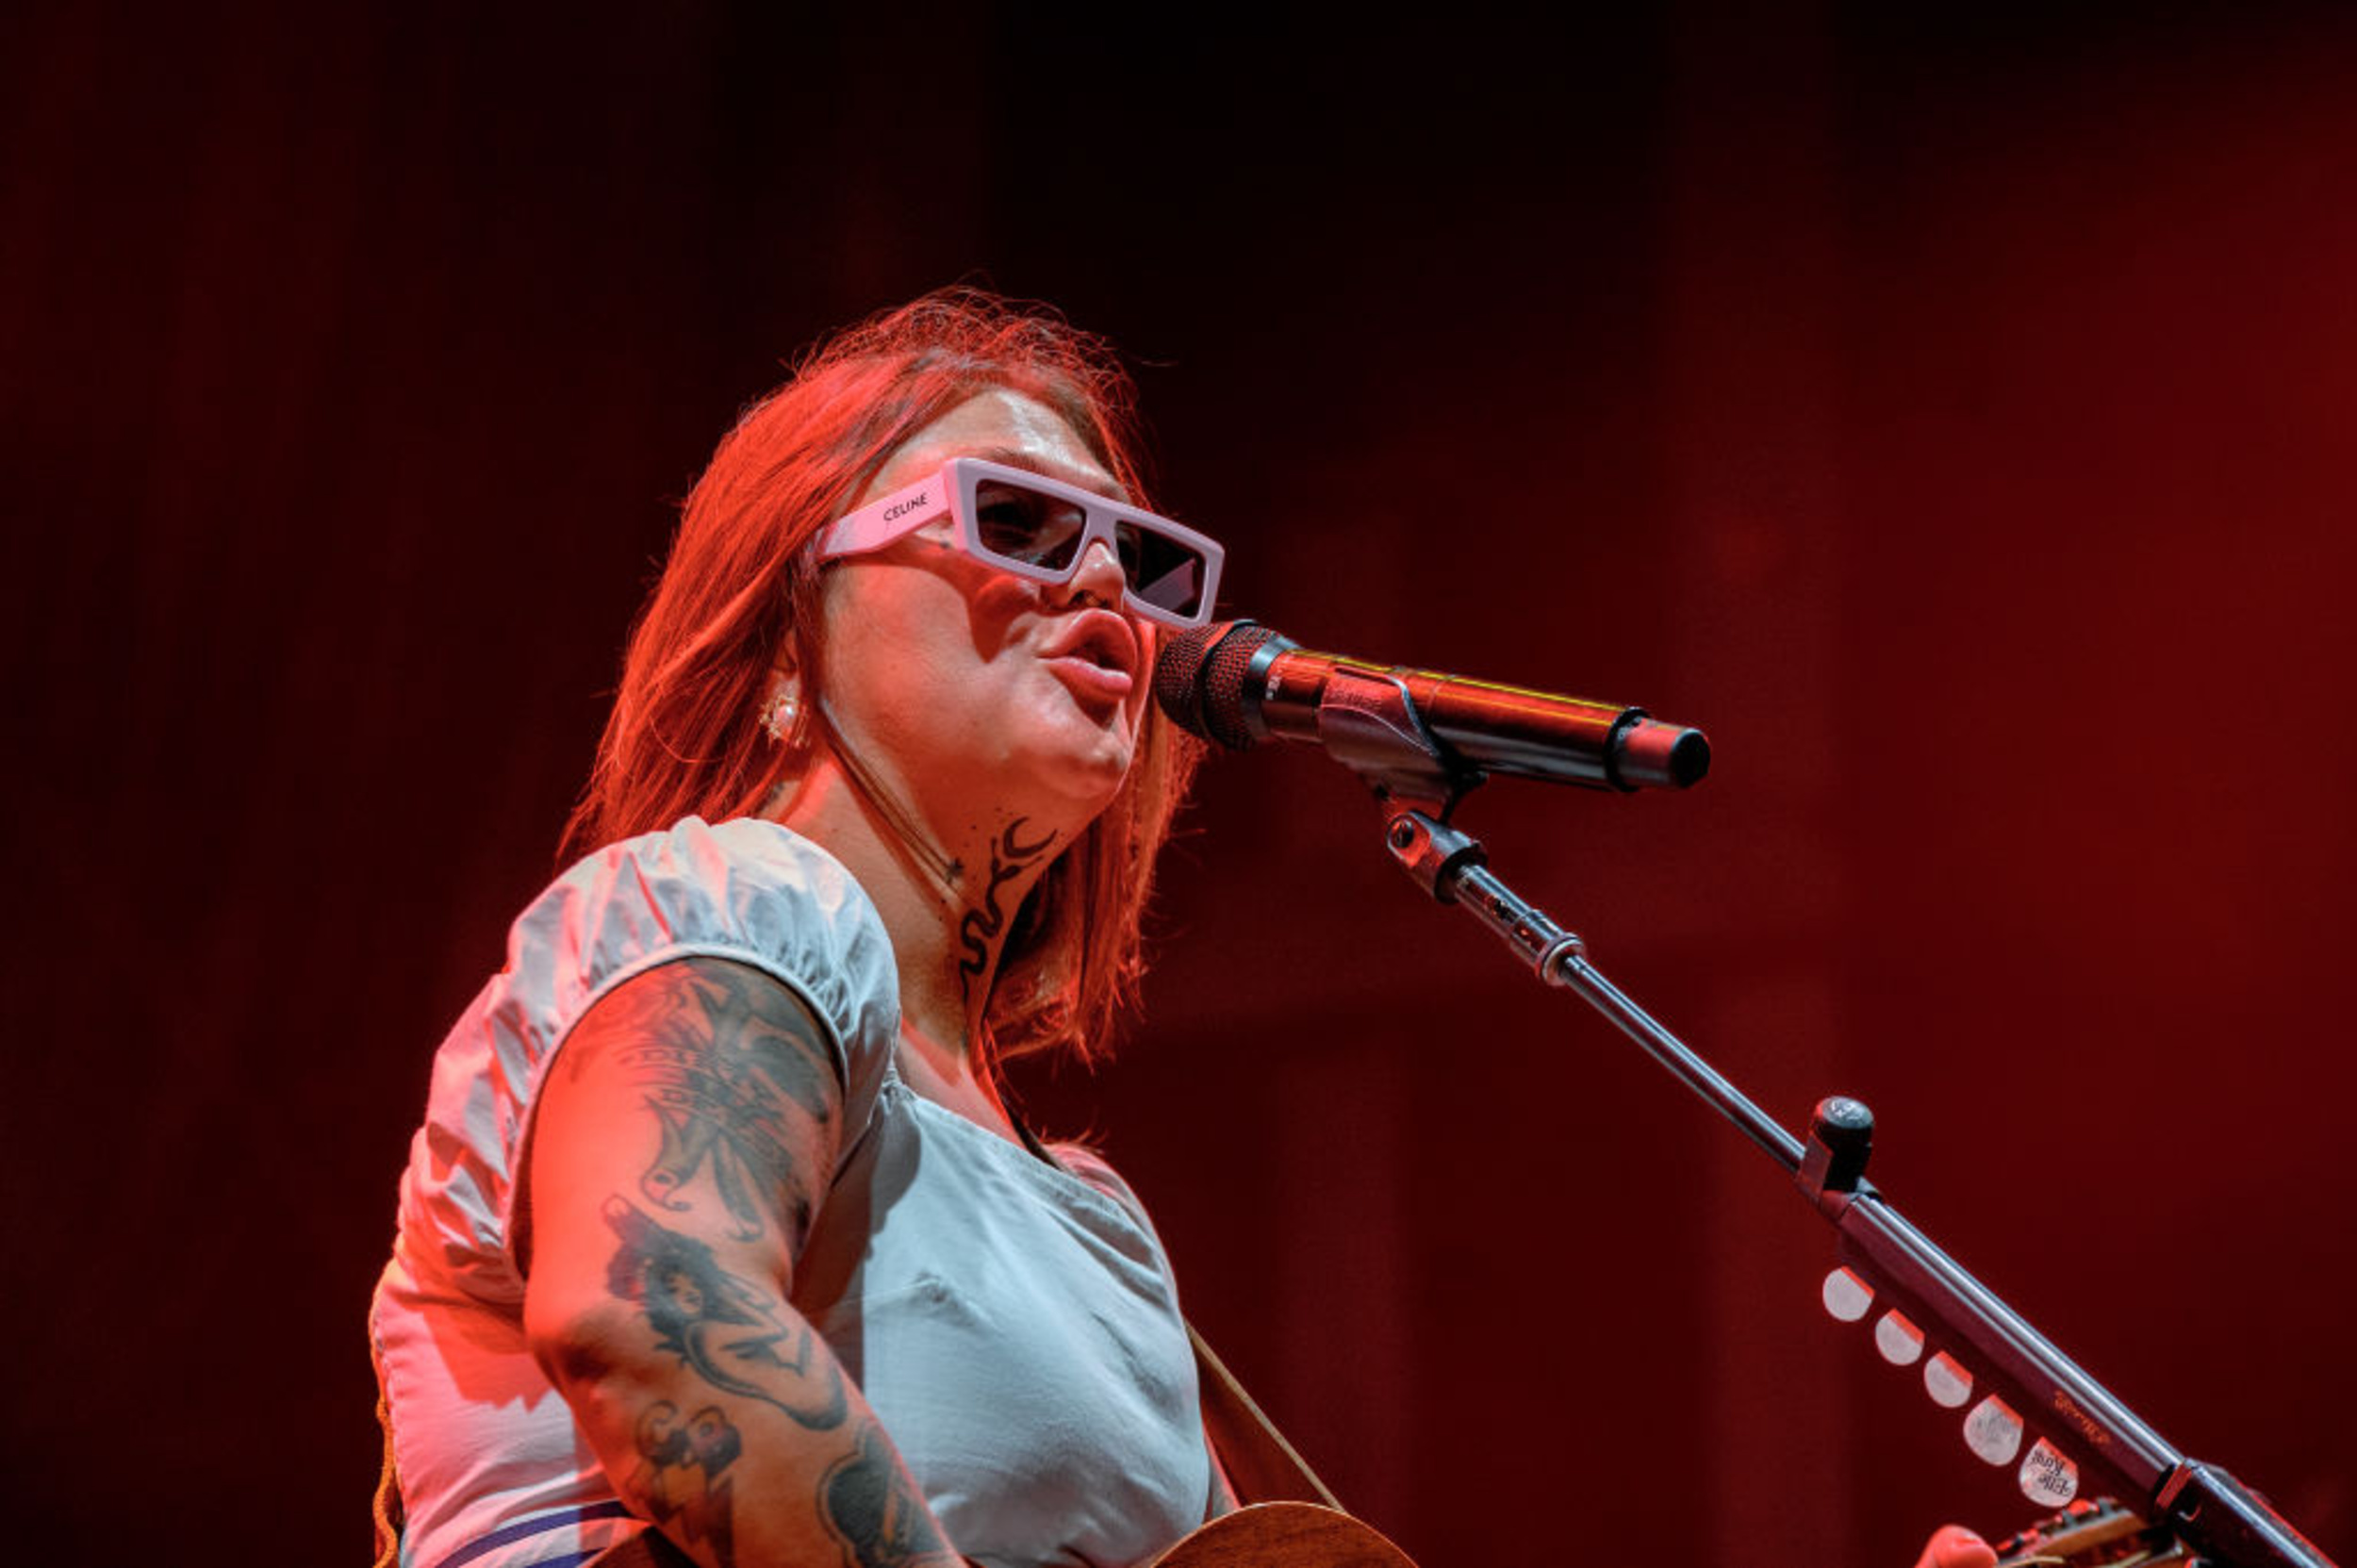 <p>Elle King may be a little more rock n' roll than country, but fans were pumped when she released "Jersey Giant," a song that was written by Tyler Childers, but has never actually appeared on one of his studio albums. </p><p>You may also like: <a href='https://www.yardbarker.com/entertainment/articles/the_25_best_julia_roberts_films/s1__34202420'>The 25 best Julia Roberts films</a></p>